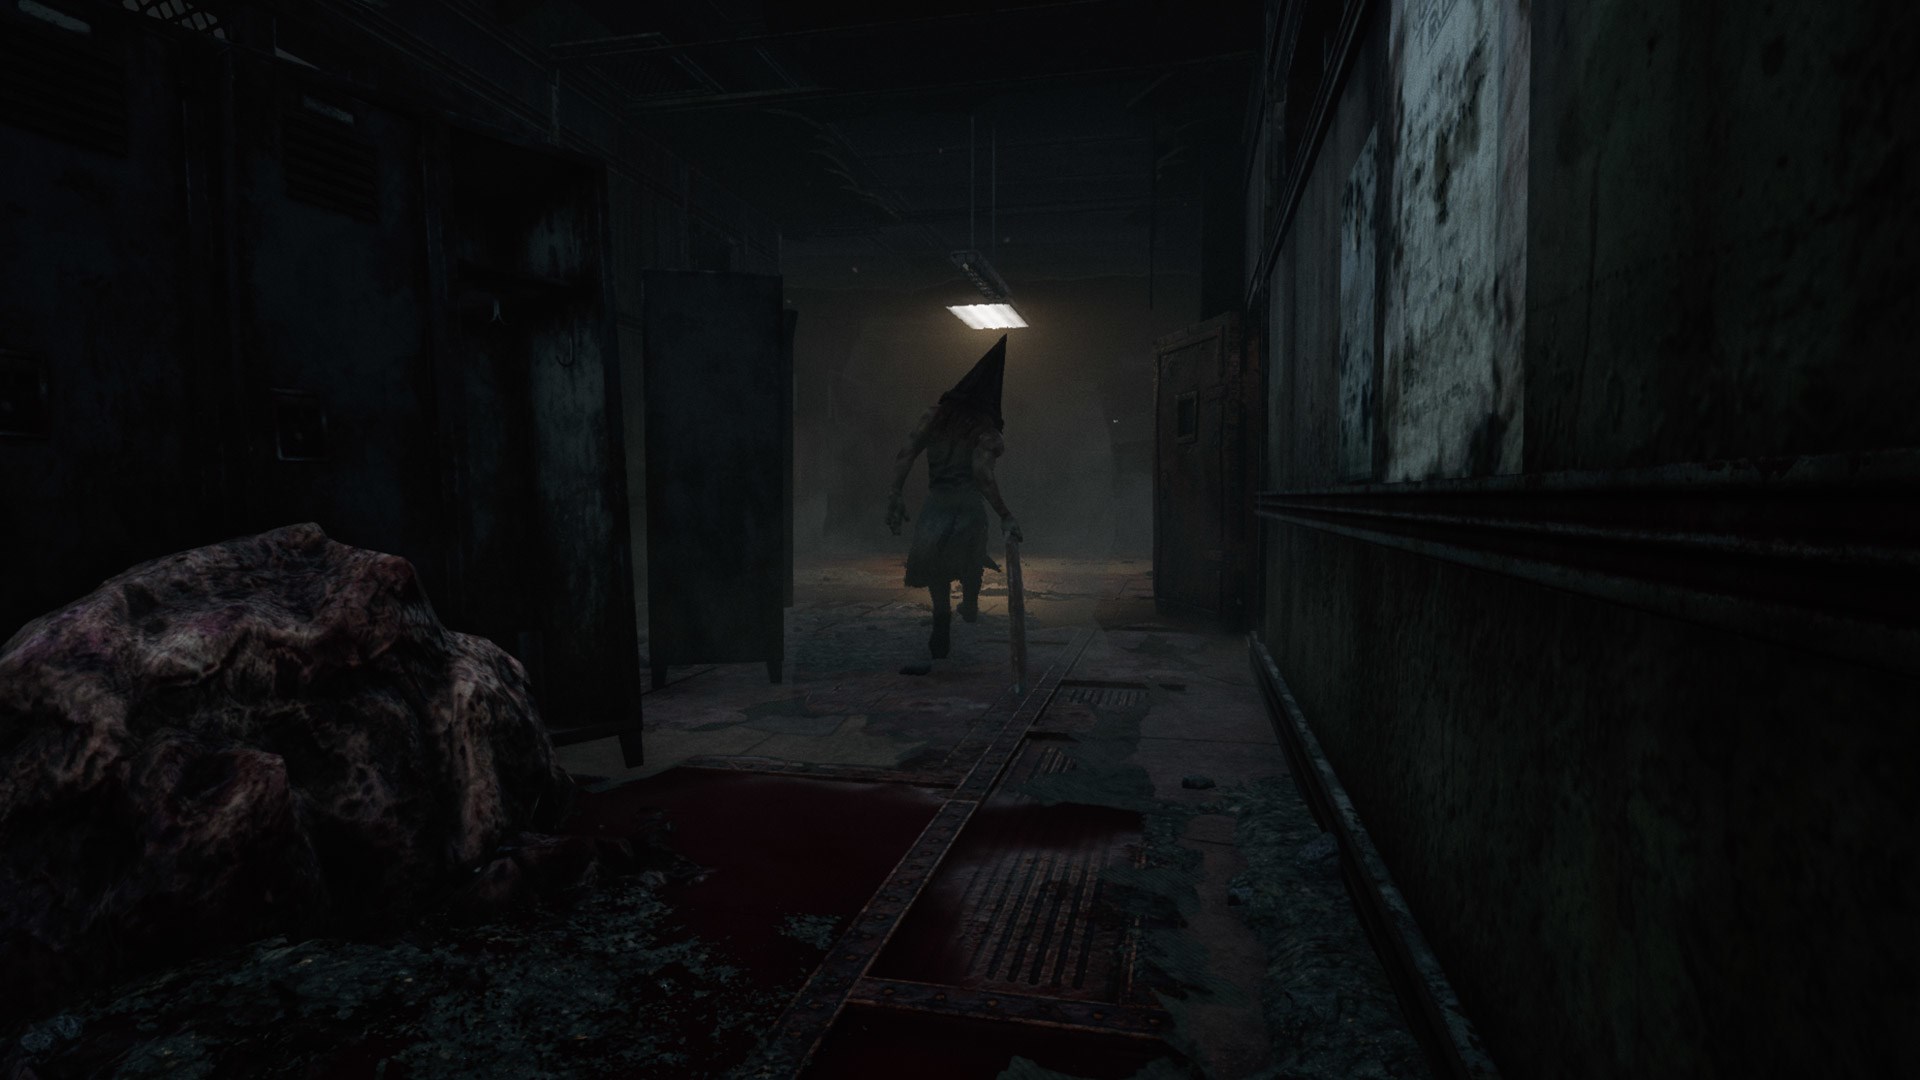 Dead by Daylight: Silent Hill Edition